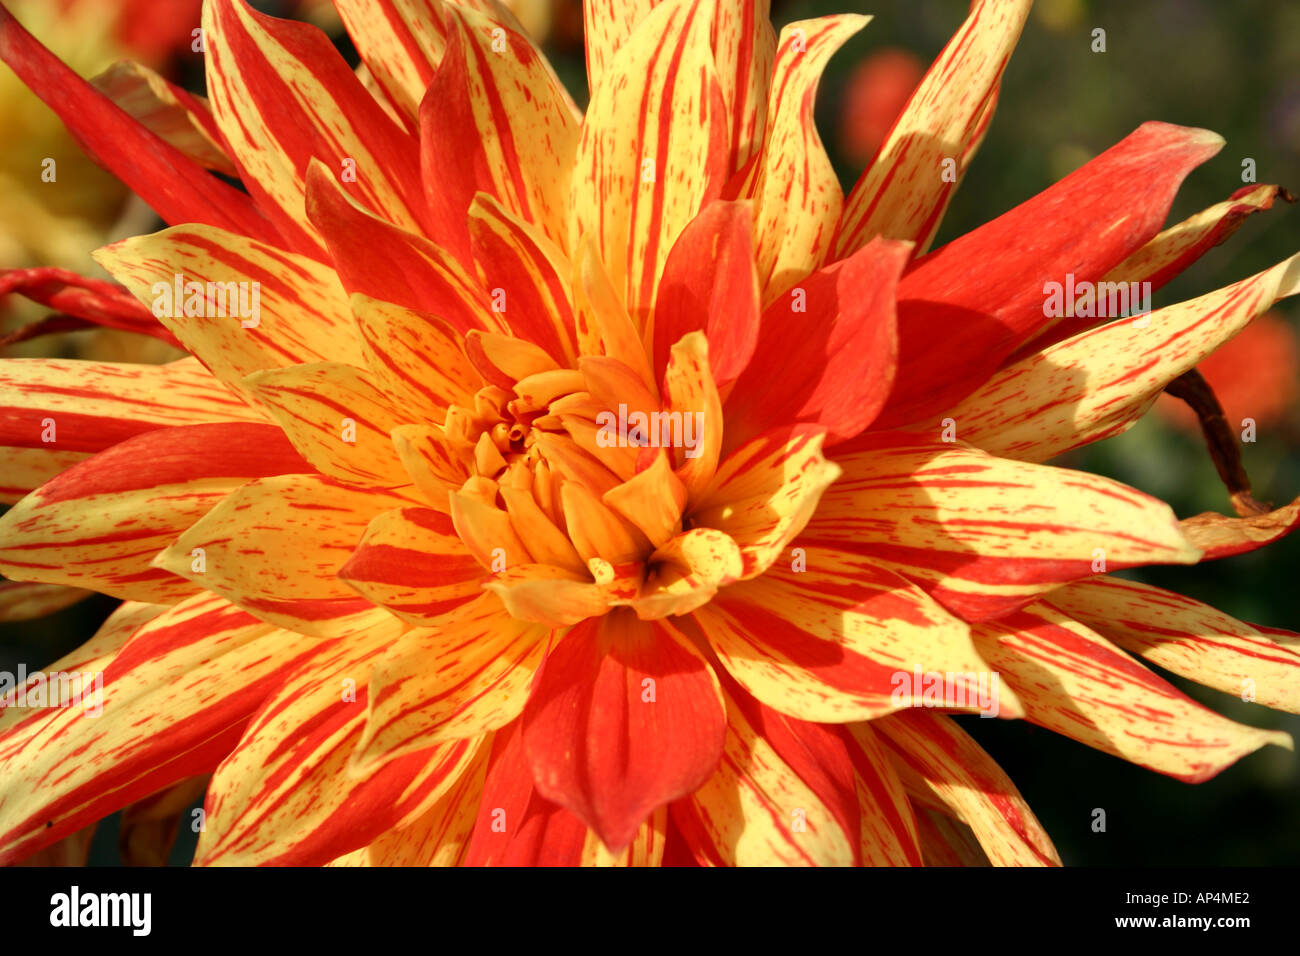 yellow and orange striped Dahlia flower at Buga Exhibition in Munich Germany Stock Photo